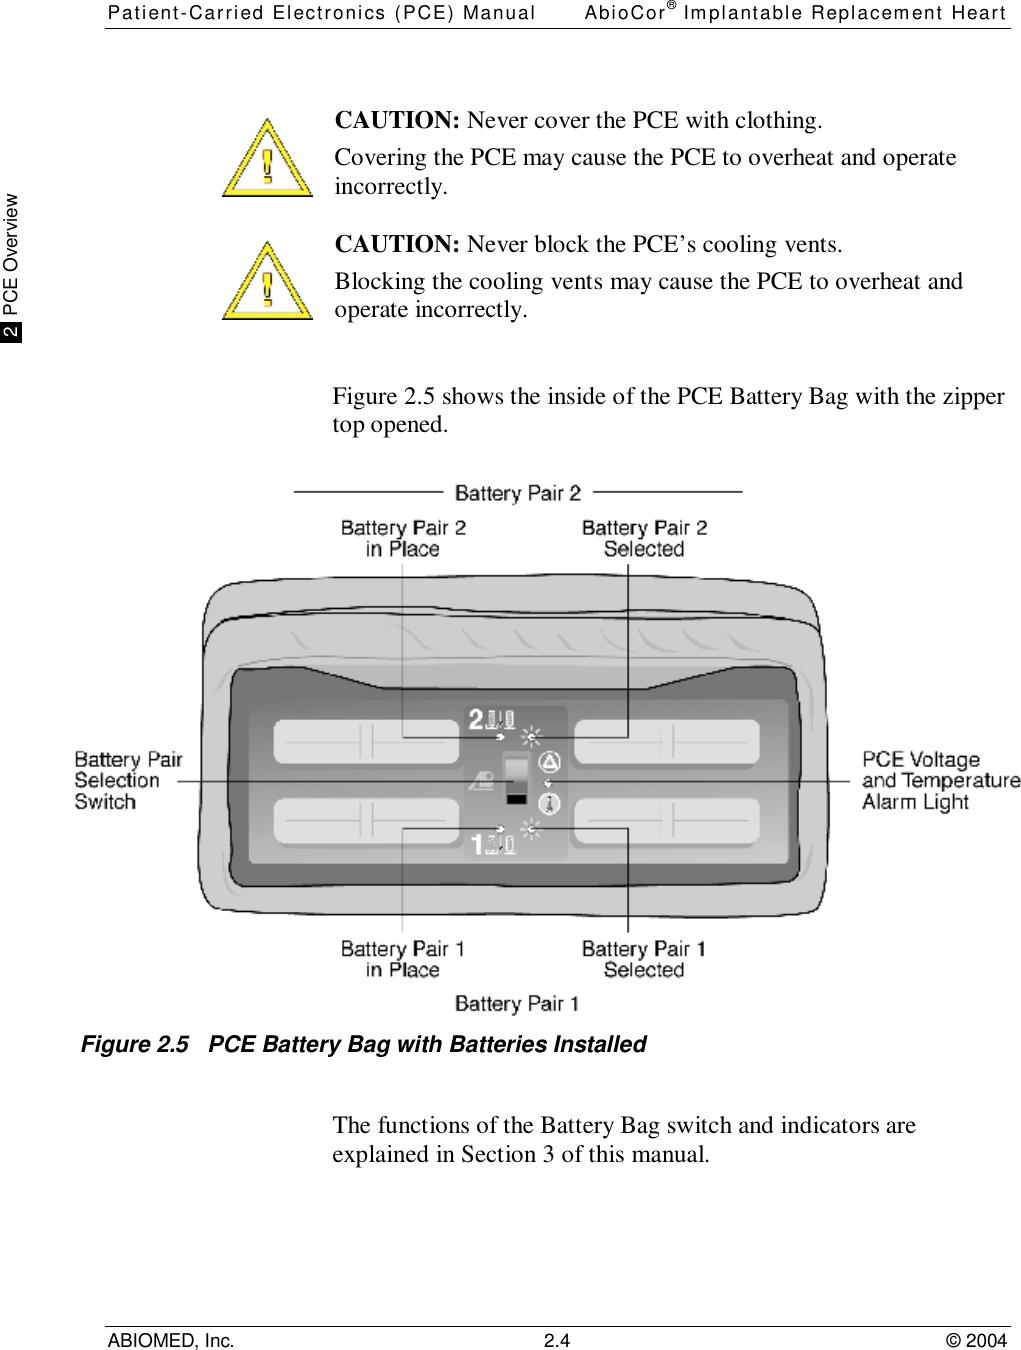 Patient-Carried Electronics (PCE) Manual AbioCor® Implantable Replacement HeartABIOMED, Inc. 2.4 © 2004 2  PCE OverviewCAUTION: Never cover the PCE with clothing.Covering the PCE may cause the PCE to overheat and operateincorrectly.CAUTION: Never block the PCE’s cooling vents.Blocking the cooling vents may cause the PCE to overheat andoperate incorrectly.Figure 2.5 shows the inside of the PCE Battery Bag with the zippertop opened.Figure 2.5   PCE Battery Bag with Batteries InstalledThe functions of the Battery Bag switch and indicators areexplained in Section 3 of this manual.